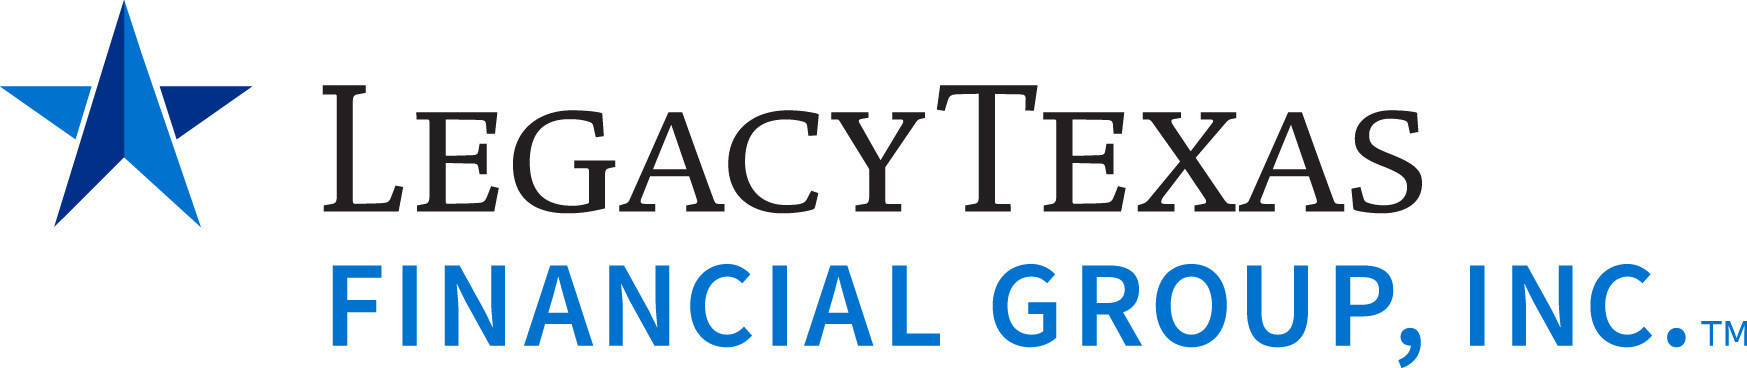 LegacyTexas Financial Group, Inc. Announces Dates of Fourth Quarter and Full Year 2018 Earnings Release and Conference Call